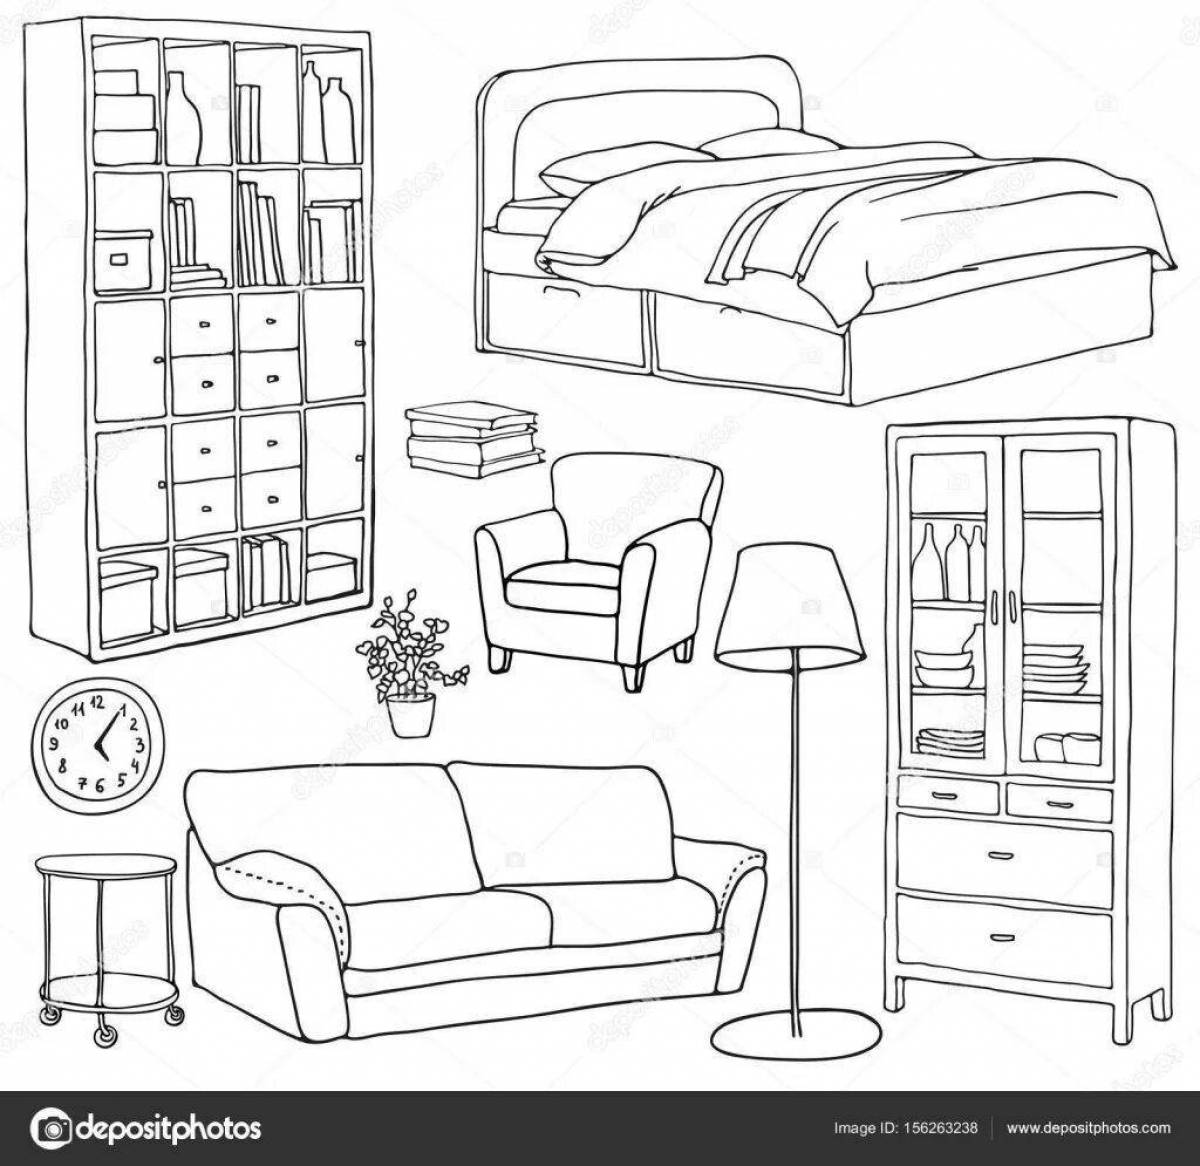 Amazing furniture coloring page